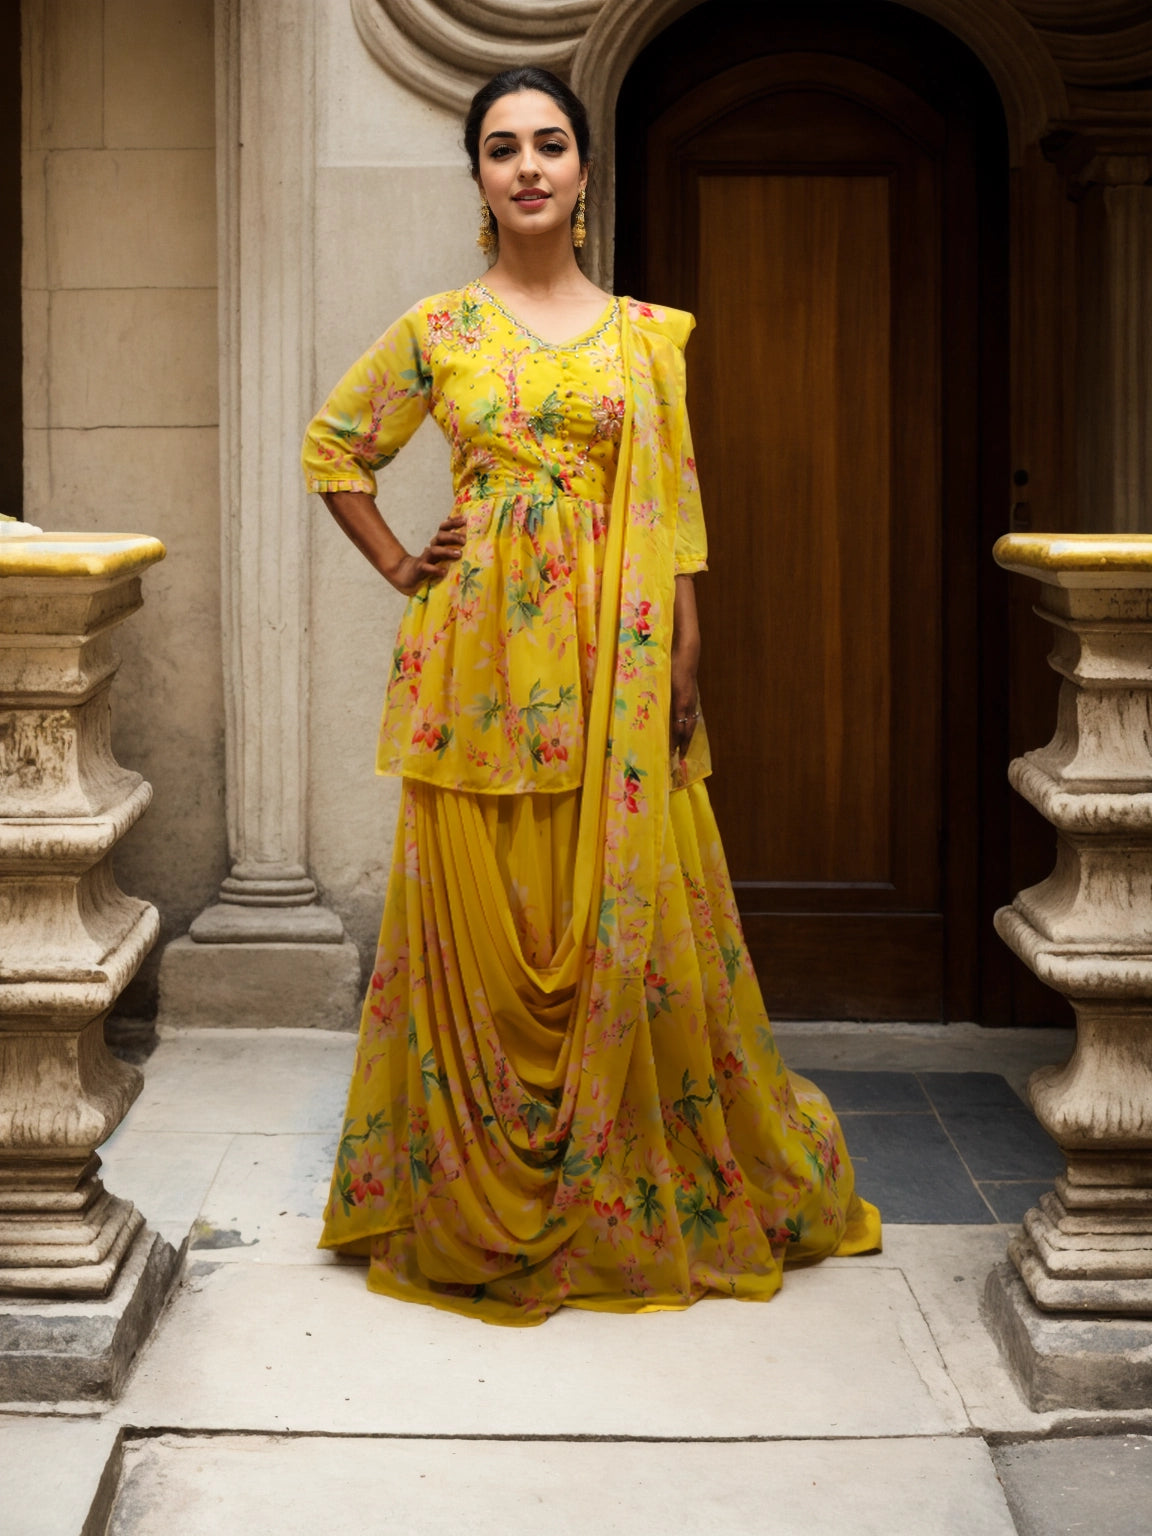 Photo of yellow indo western outfit for mehendi